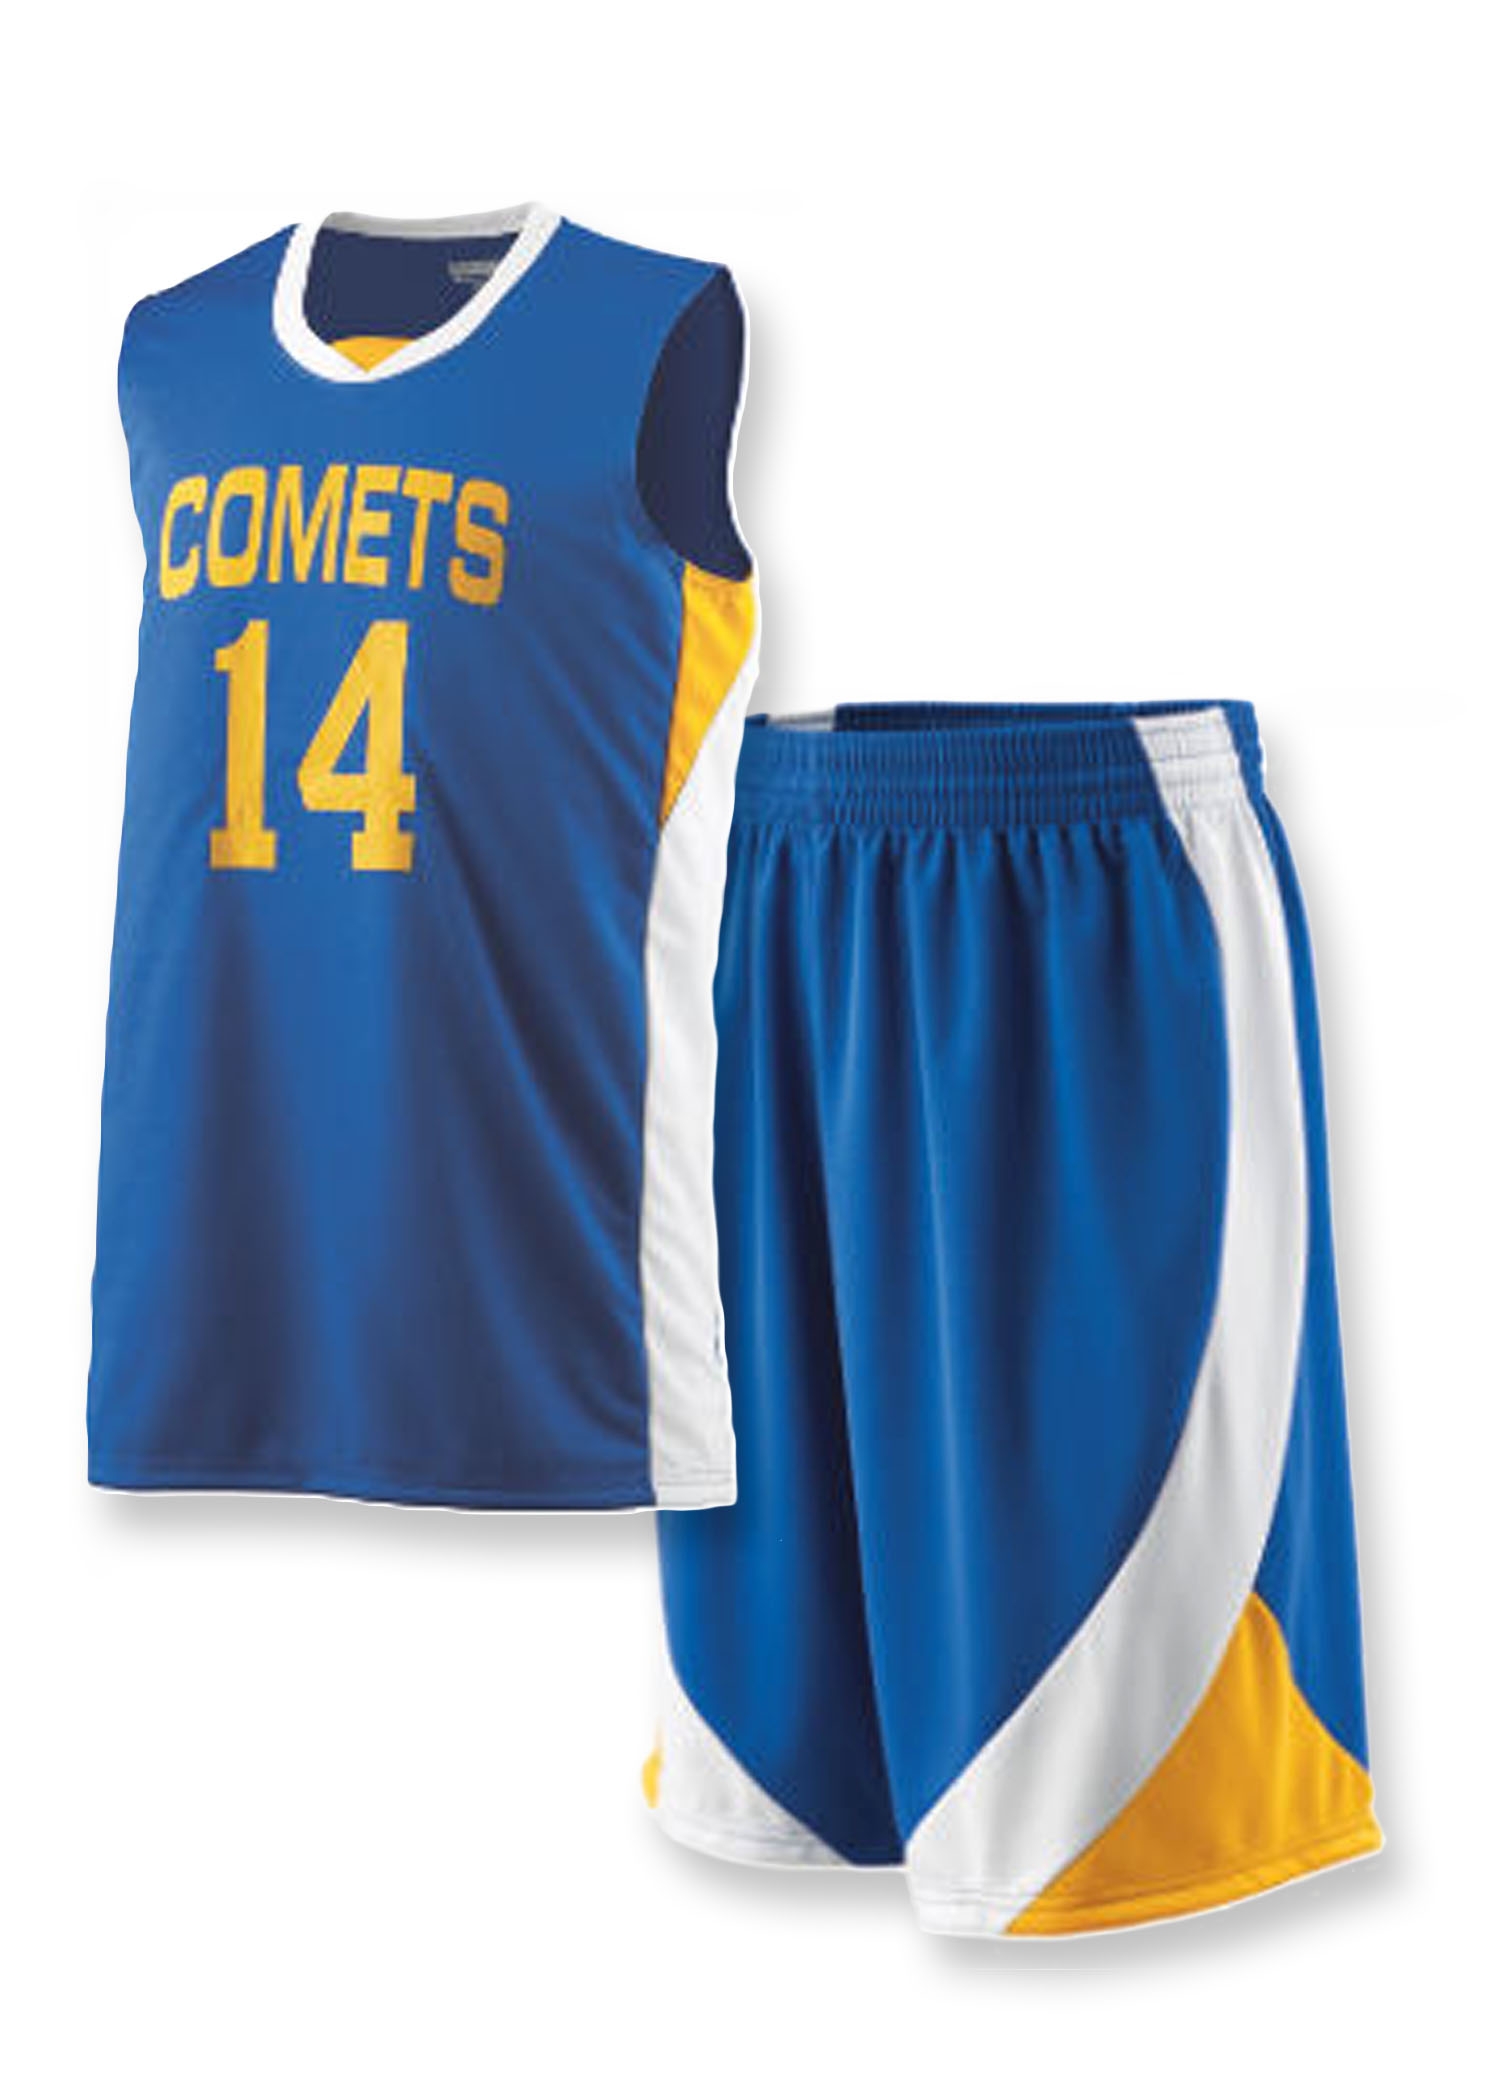 Youth Team Basketball Uniform Package with Graphics